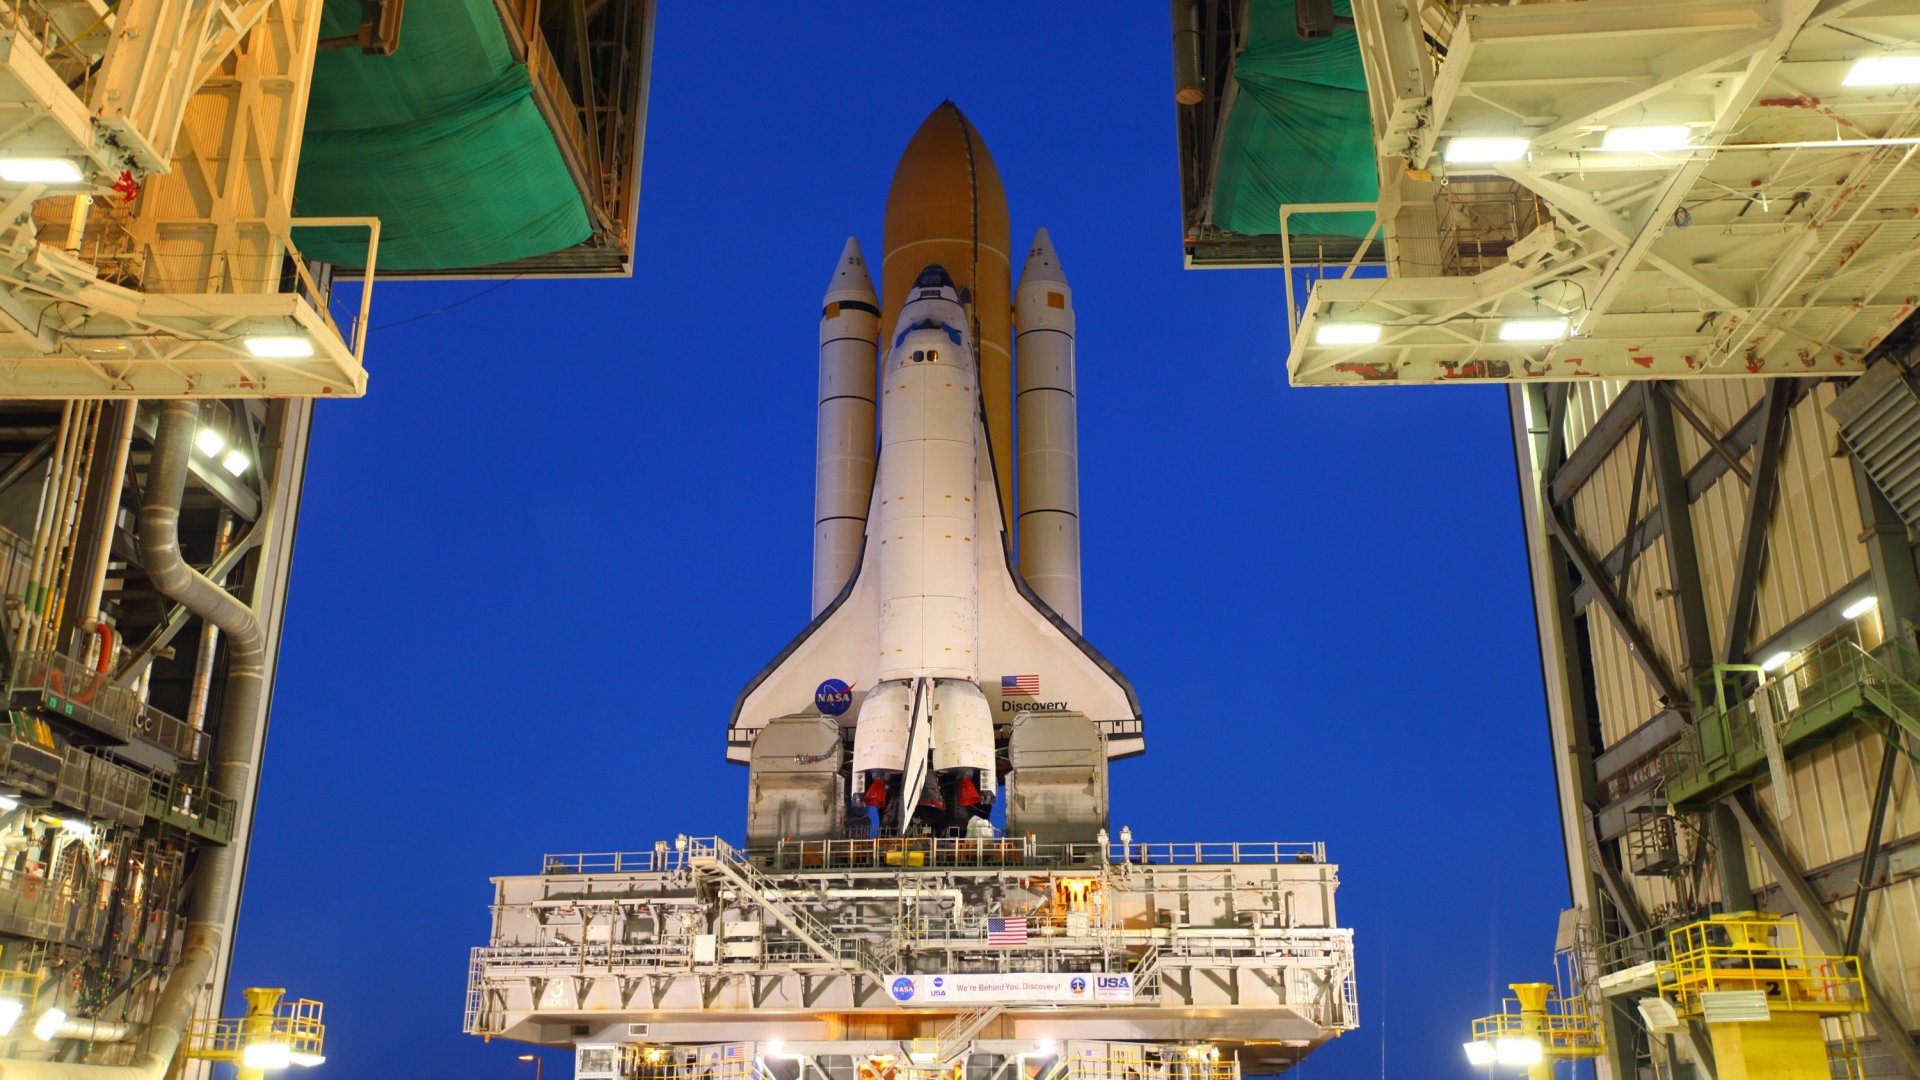 Download Full Hd Space Shuttle Discovery Pc Wallpaper - Space Shuttle Discovery - HD Wallpaper 